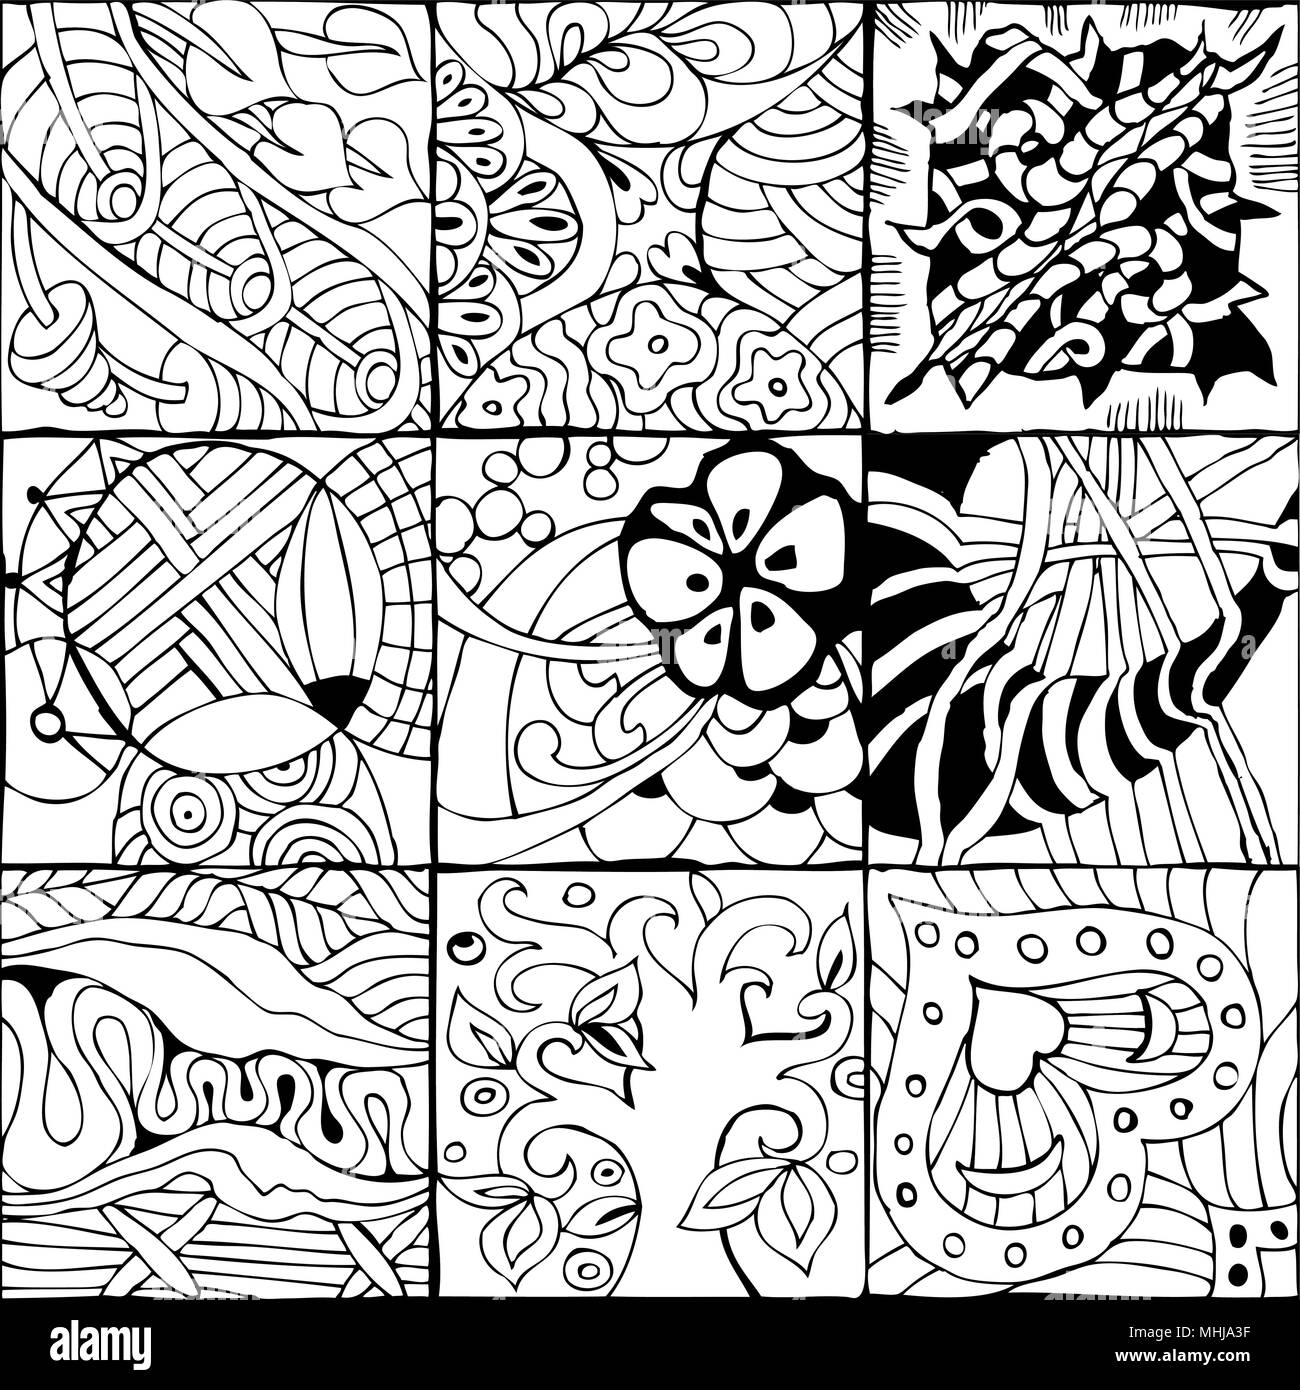 Vector Adult Coloring Book Textures. various patterns. 9 pieces Stock ...